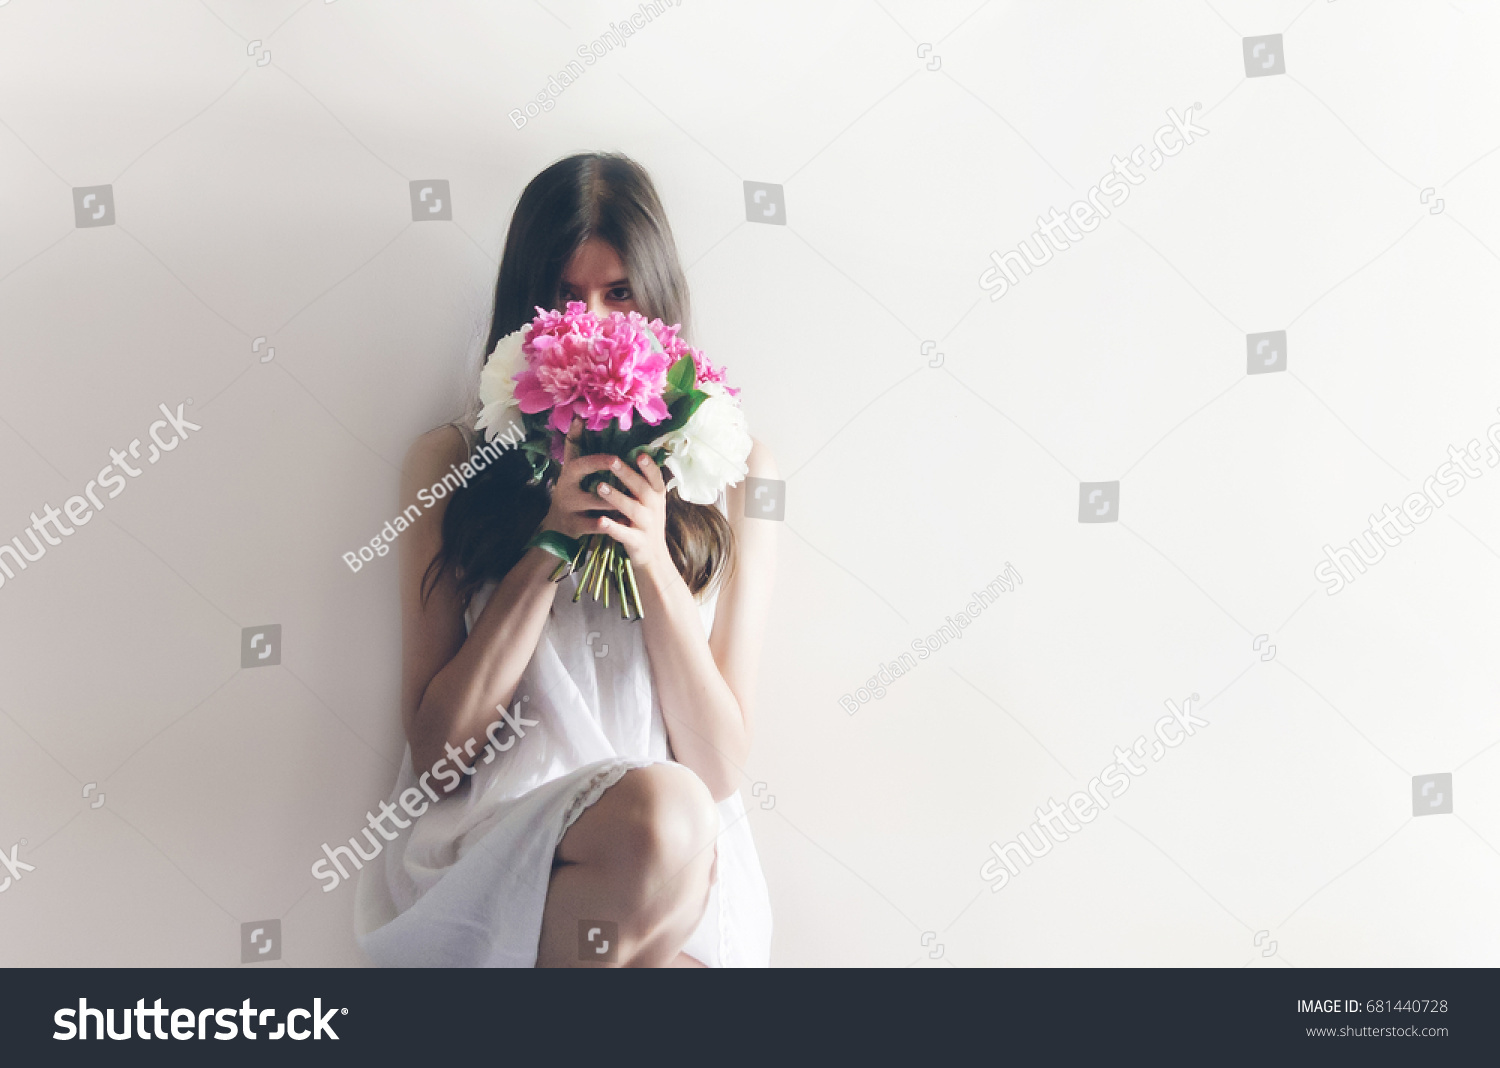 hipster woman in white dress holding pink bouquet of peonies in white room. boho bride with peony bouquet in front, relaxing in morning, space for text. spring girl with flowers #681440728